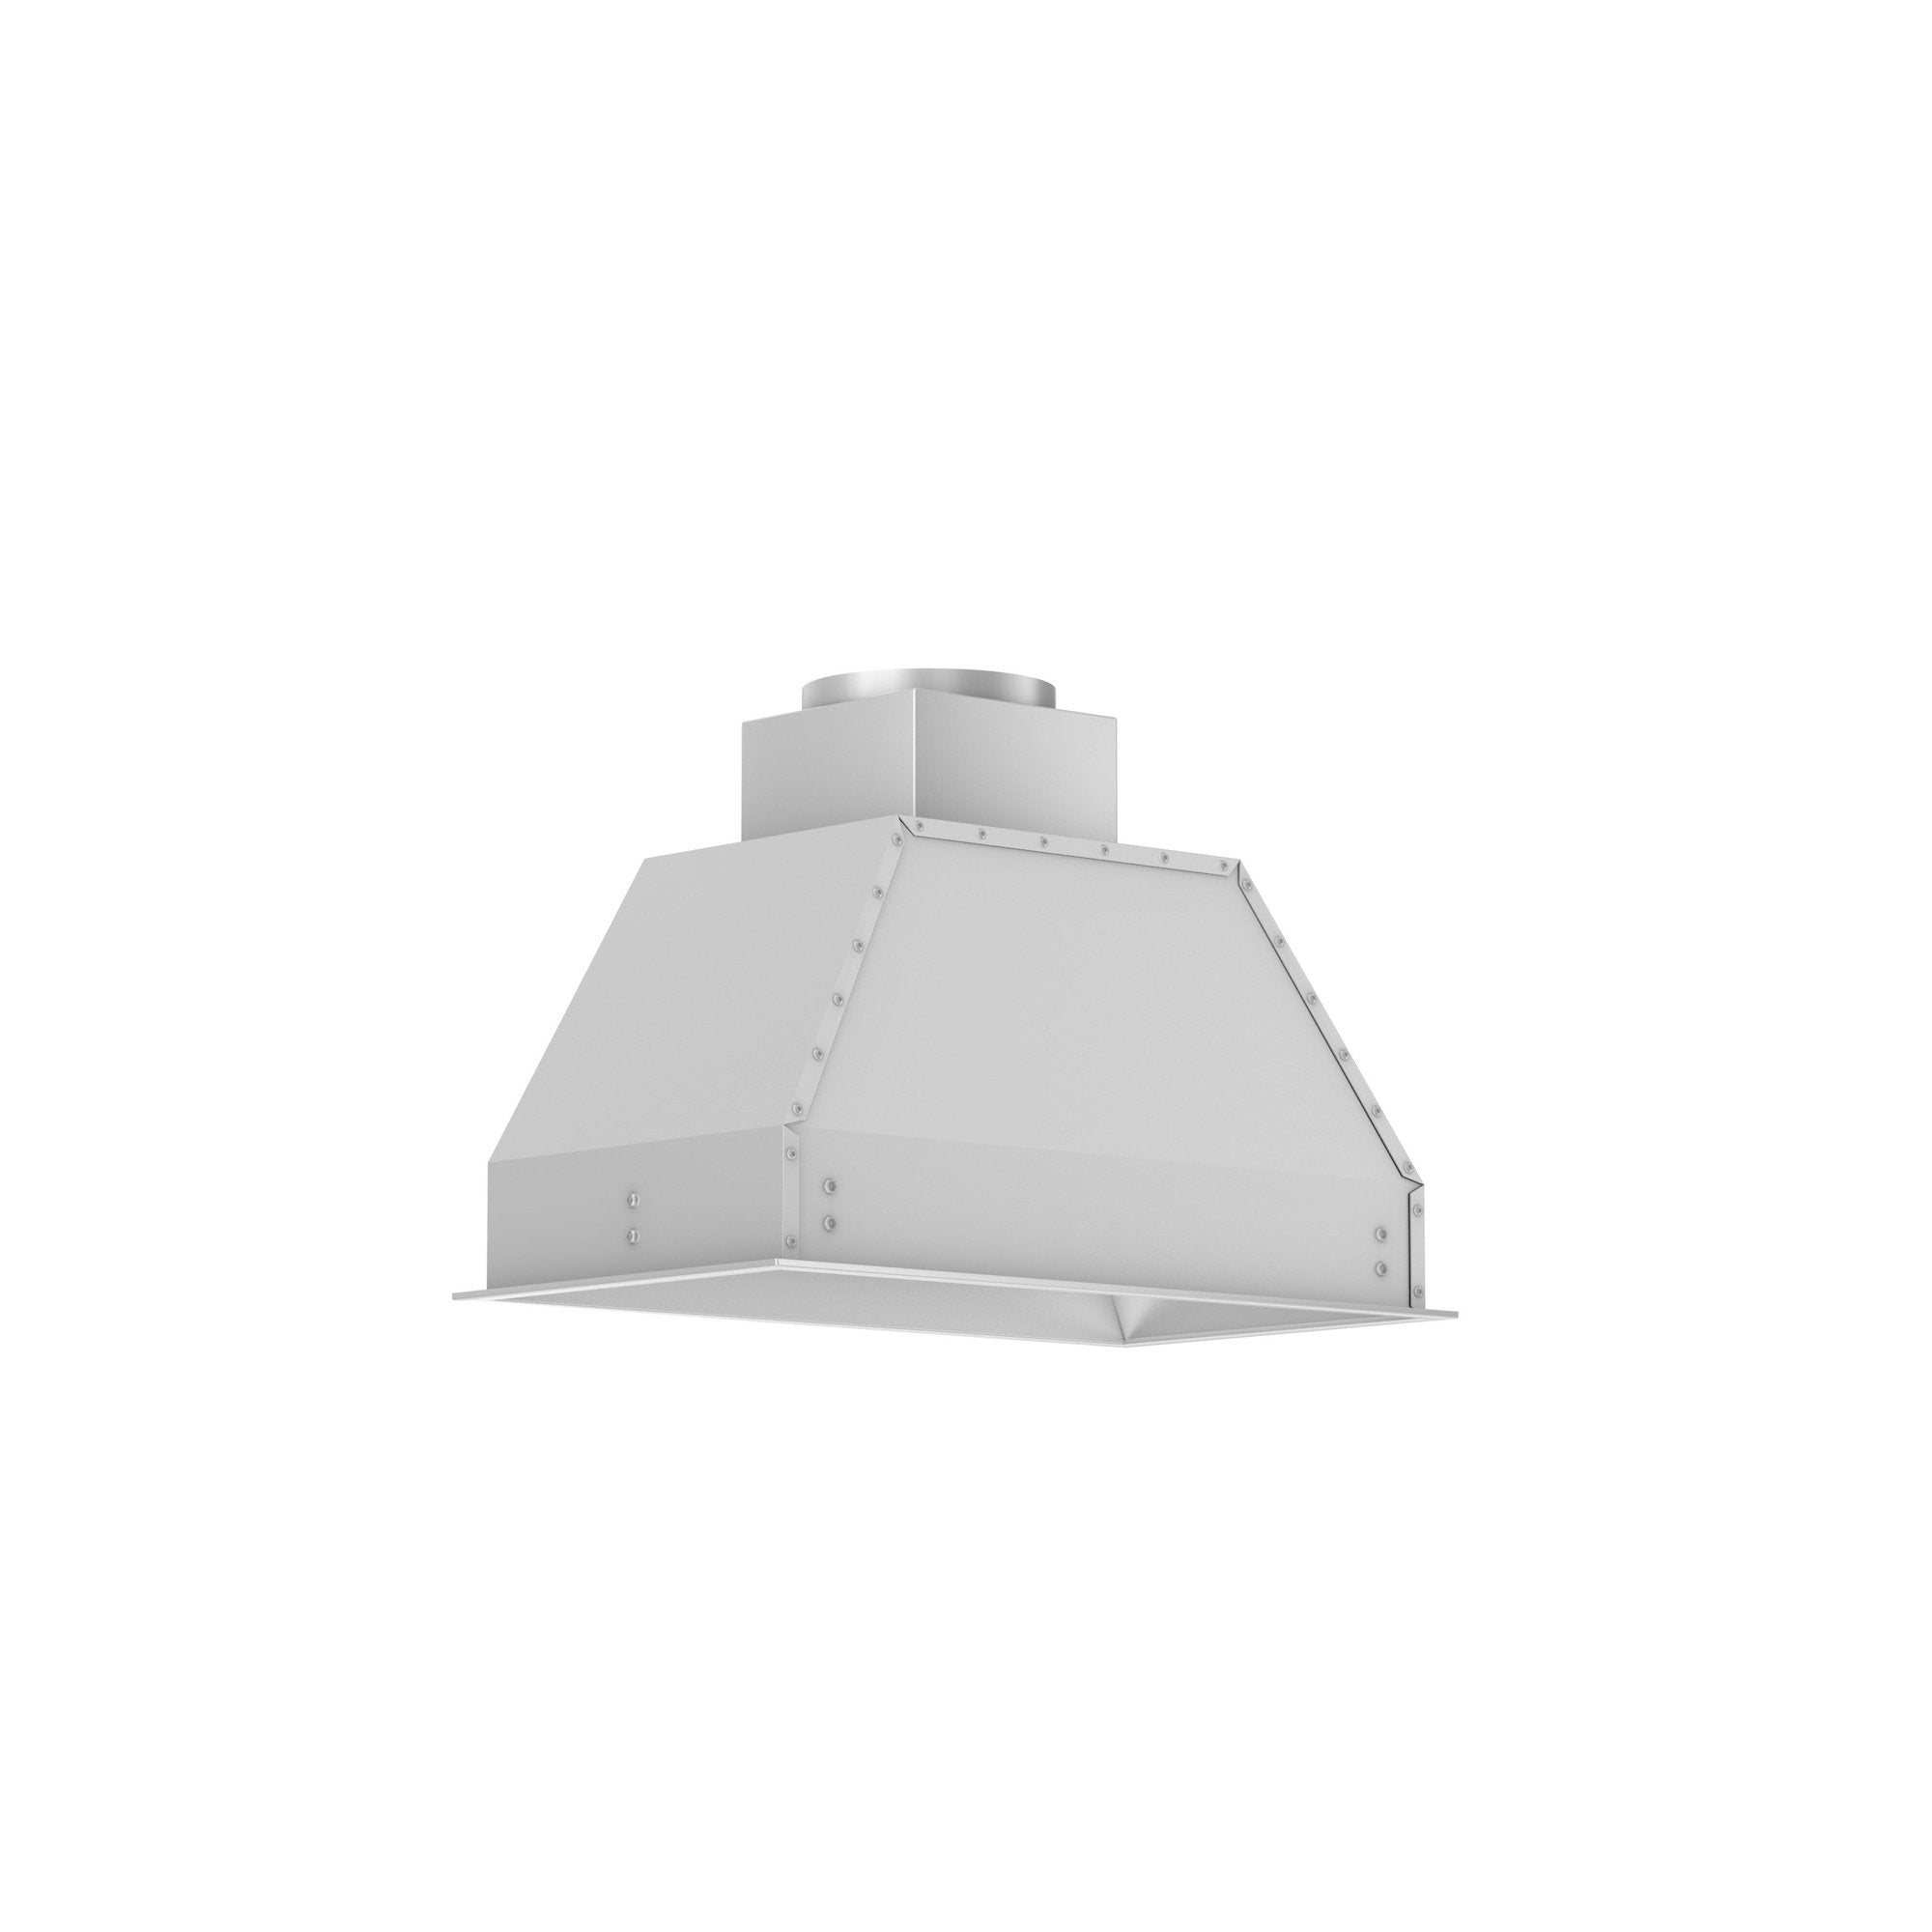 ZLINE Ducted Wall Mount Range Hood Insert in Outdoor Approved Stainless Steel - 695-304